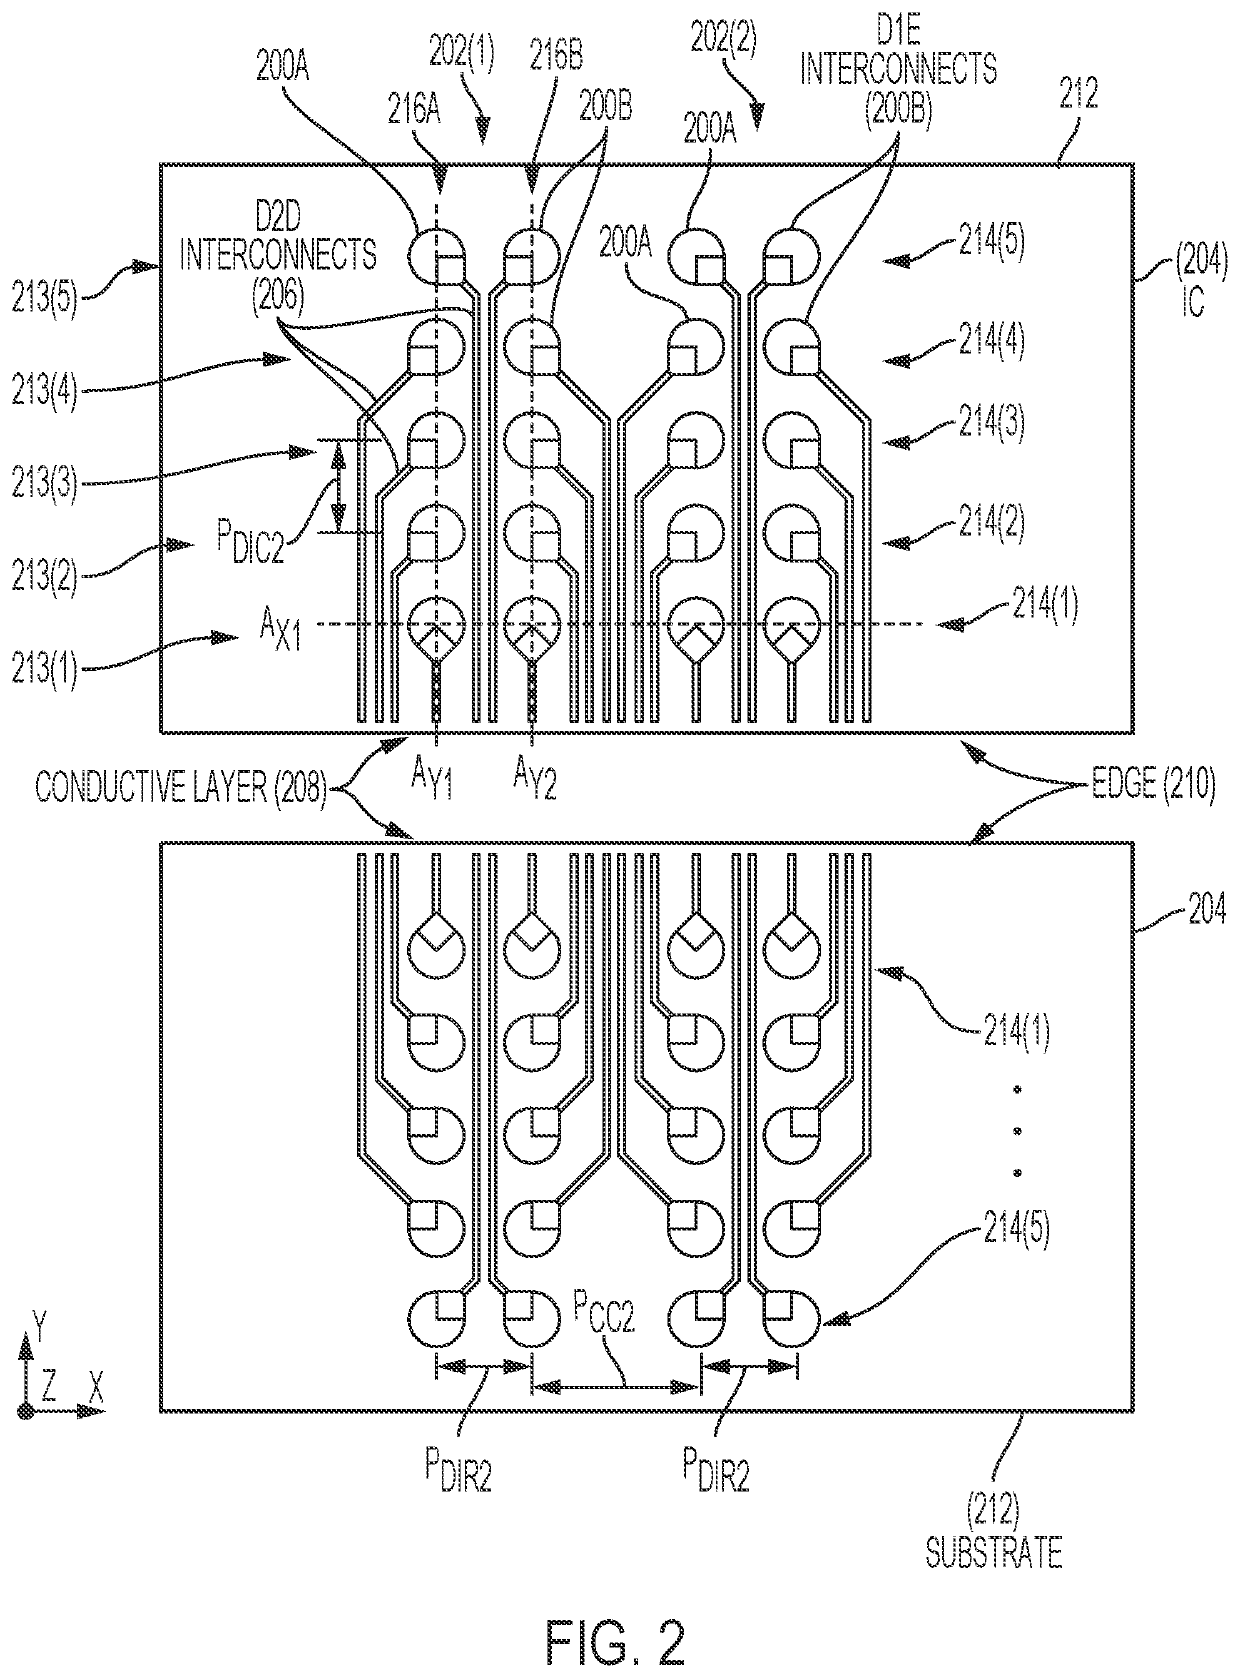 INTEGRATED CIRCUITS (ICs) WITH MULTI-ROW COLUMNAR DIE INTERCONNECTS AND IC PACKAGES INCLUDING HIGH DENSITY DIE-TO-DIE (D2D) INTERCONNECTS